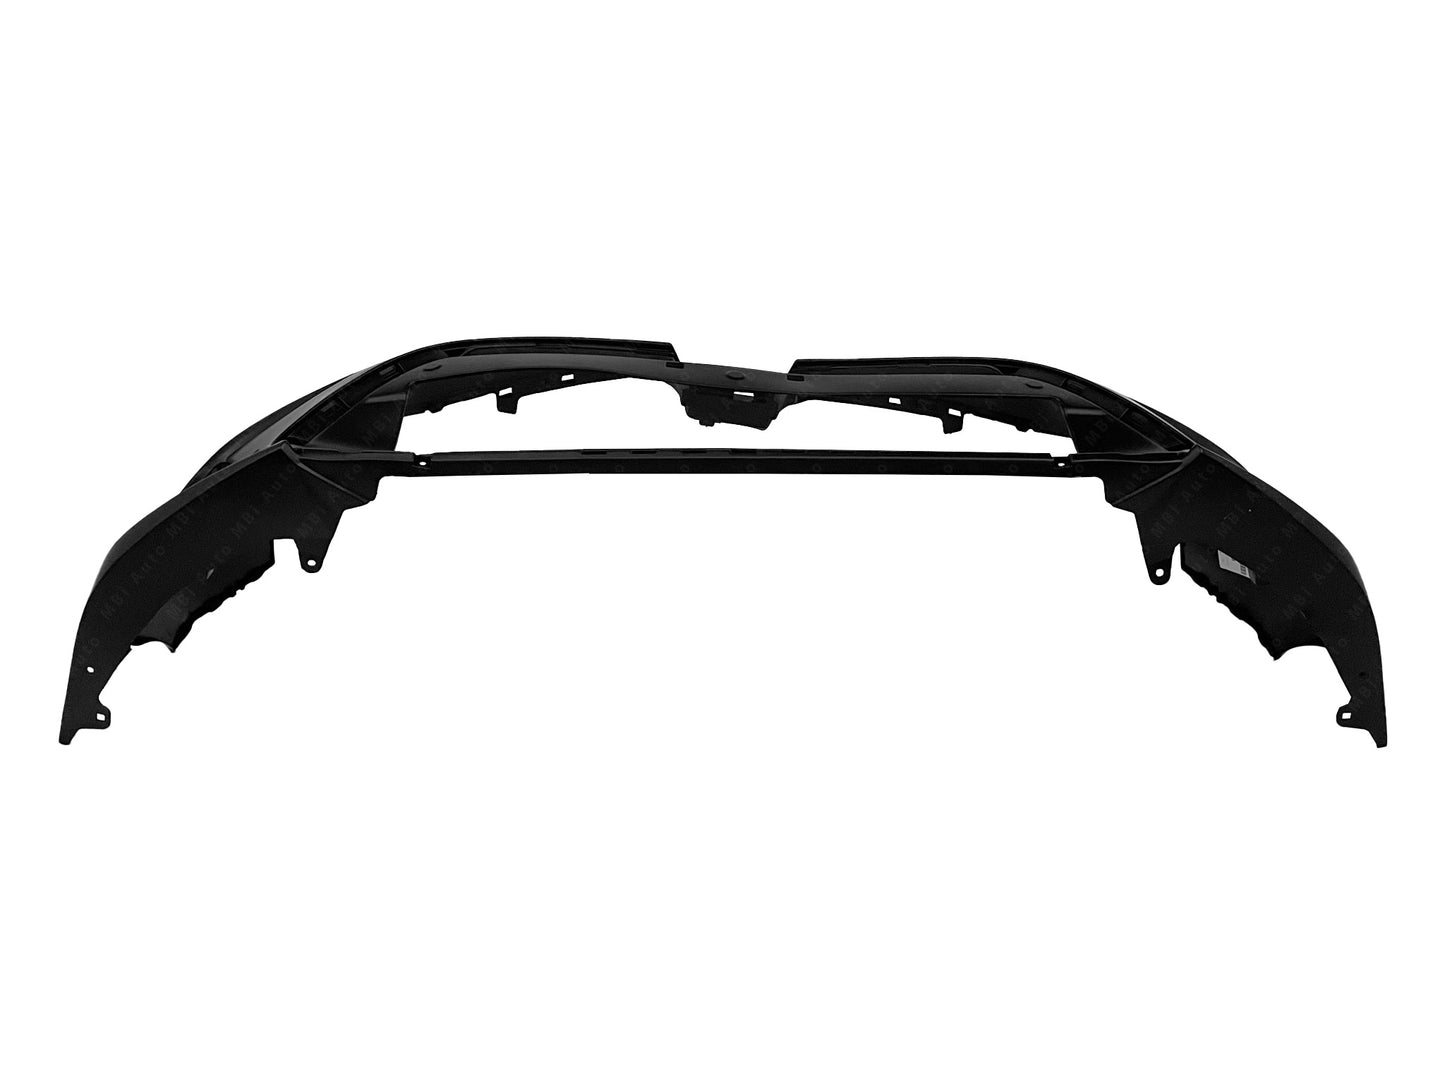 Toyota Corolla 2017 - 2019 Front Bumper Cover 17 - 19 TO1000424 Bumper-King